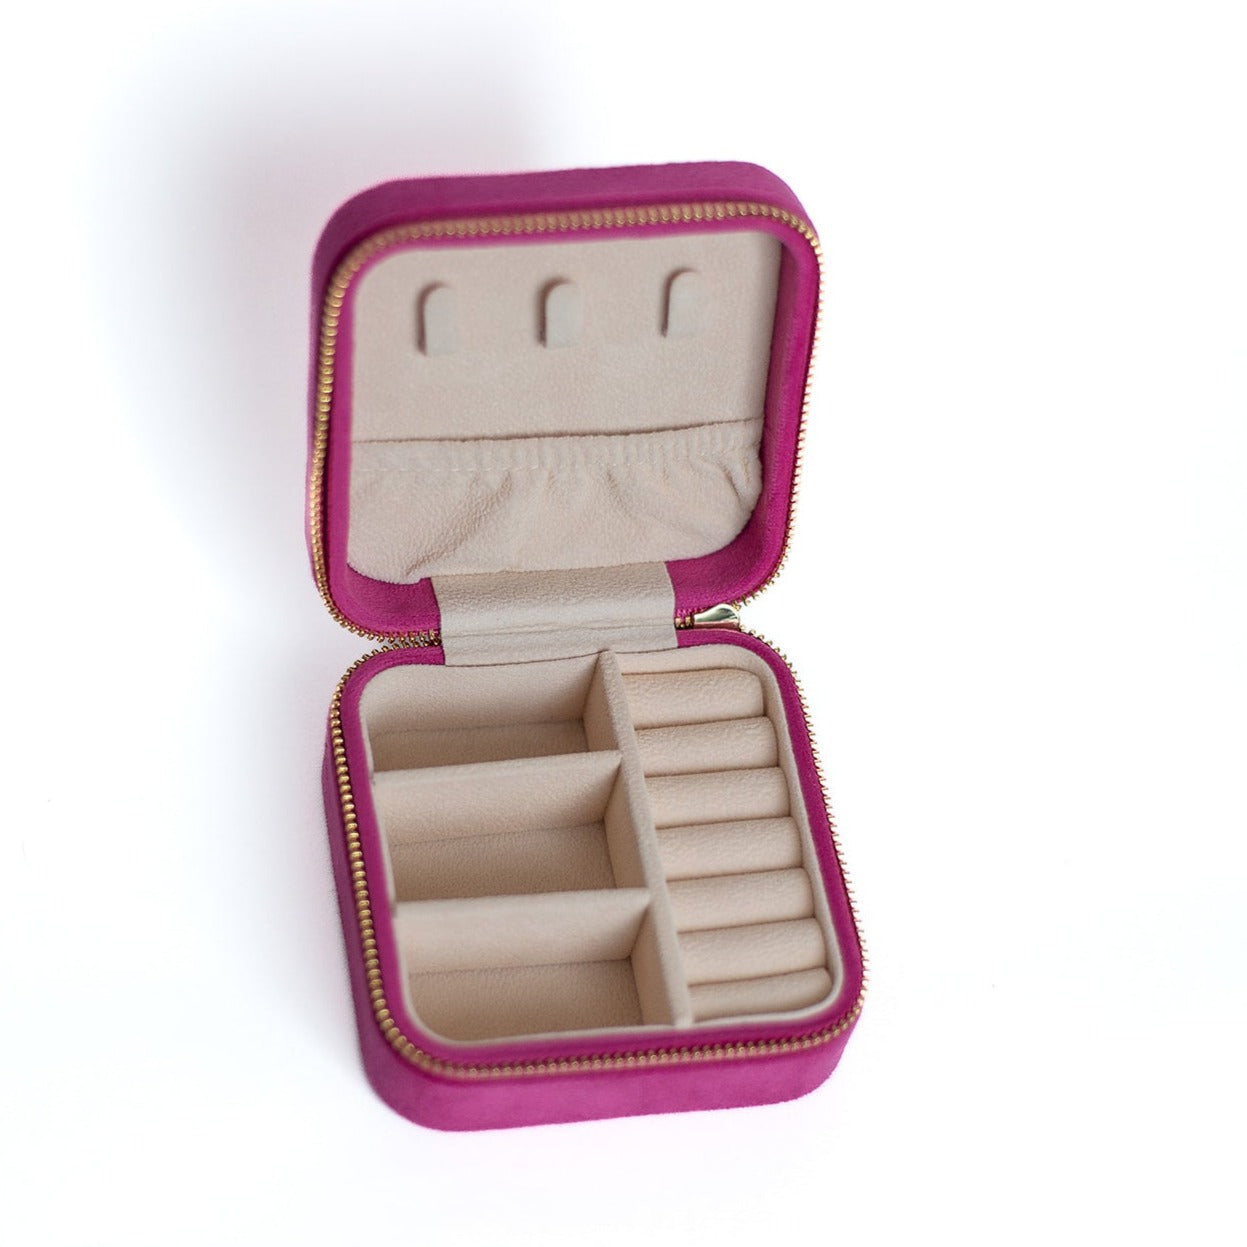 The inside of a fuchsia jewelry case. There are three storage sections and seven ring slots on the bottom portion of the case. On the top half, there are three hooks for chains or necklaces and well as a pouch to tuck them in.